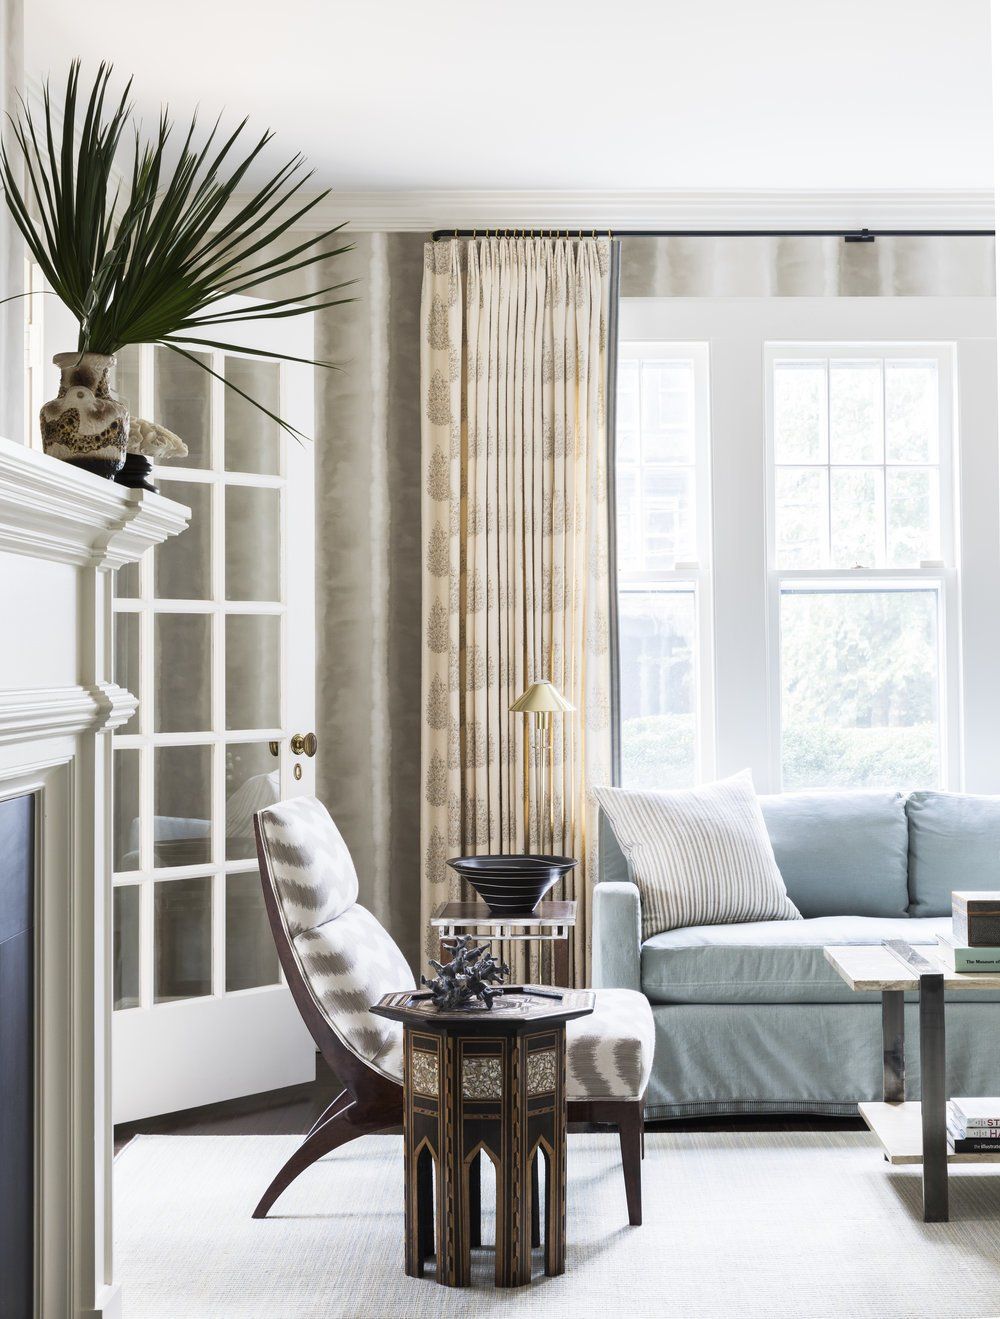 ideal curtains, Kevin Isbell, selected pinch pleated block-print linen curtains with tape-trim on the leading and bottom edges hung from blackened metal rods and brass rings for this calm clean living style.